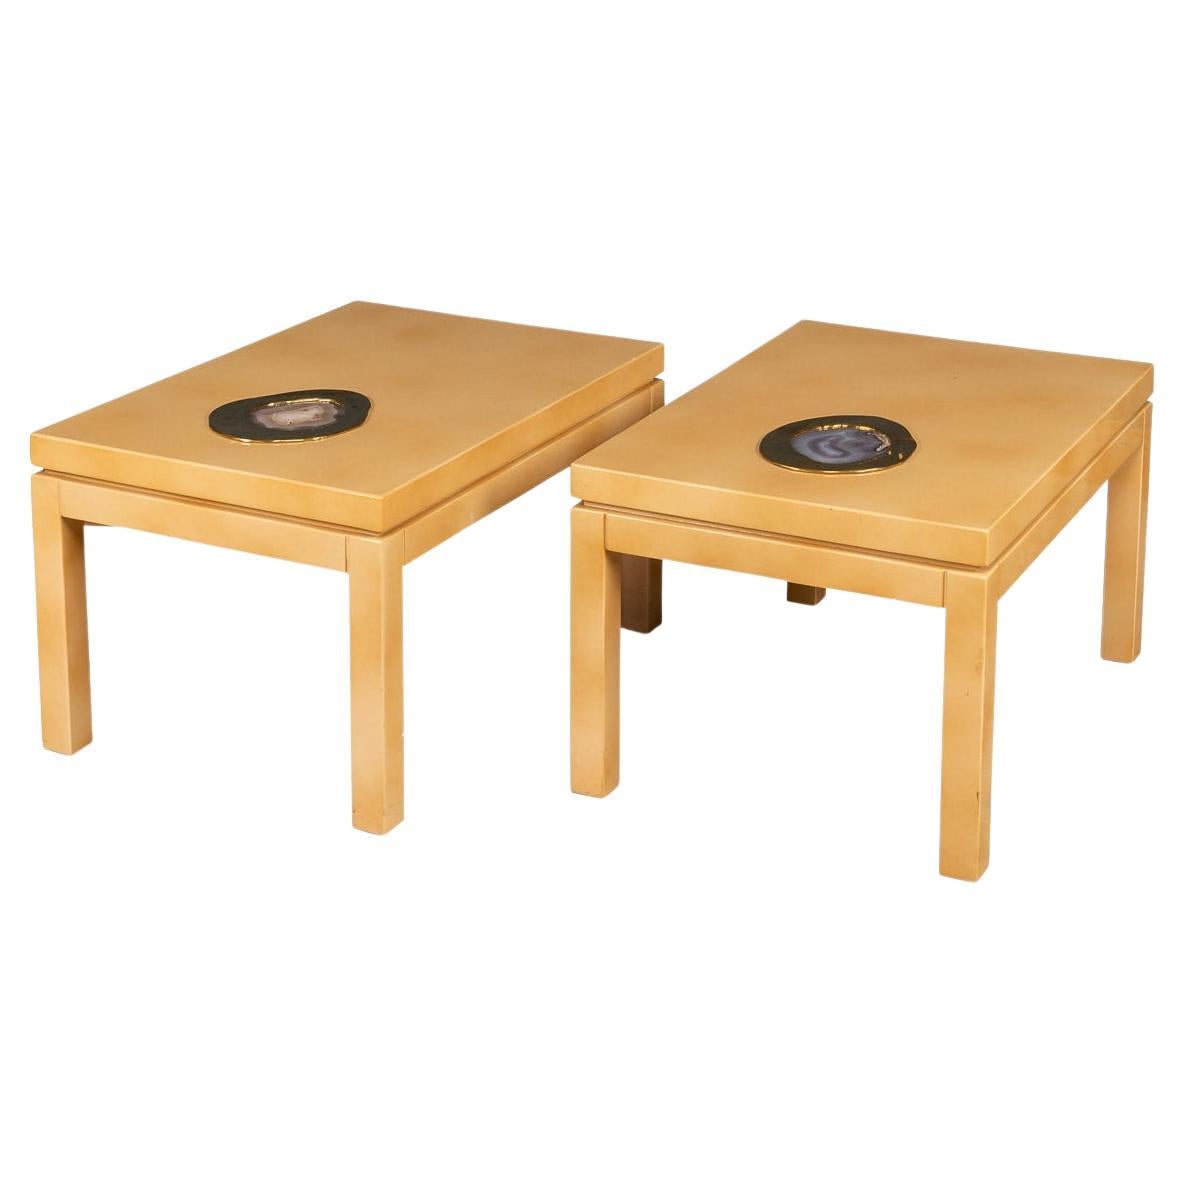 A Pair Of Belgian Lacquered Wood & Agate Side Tables By Willy Daro, c.1970 For Sale